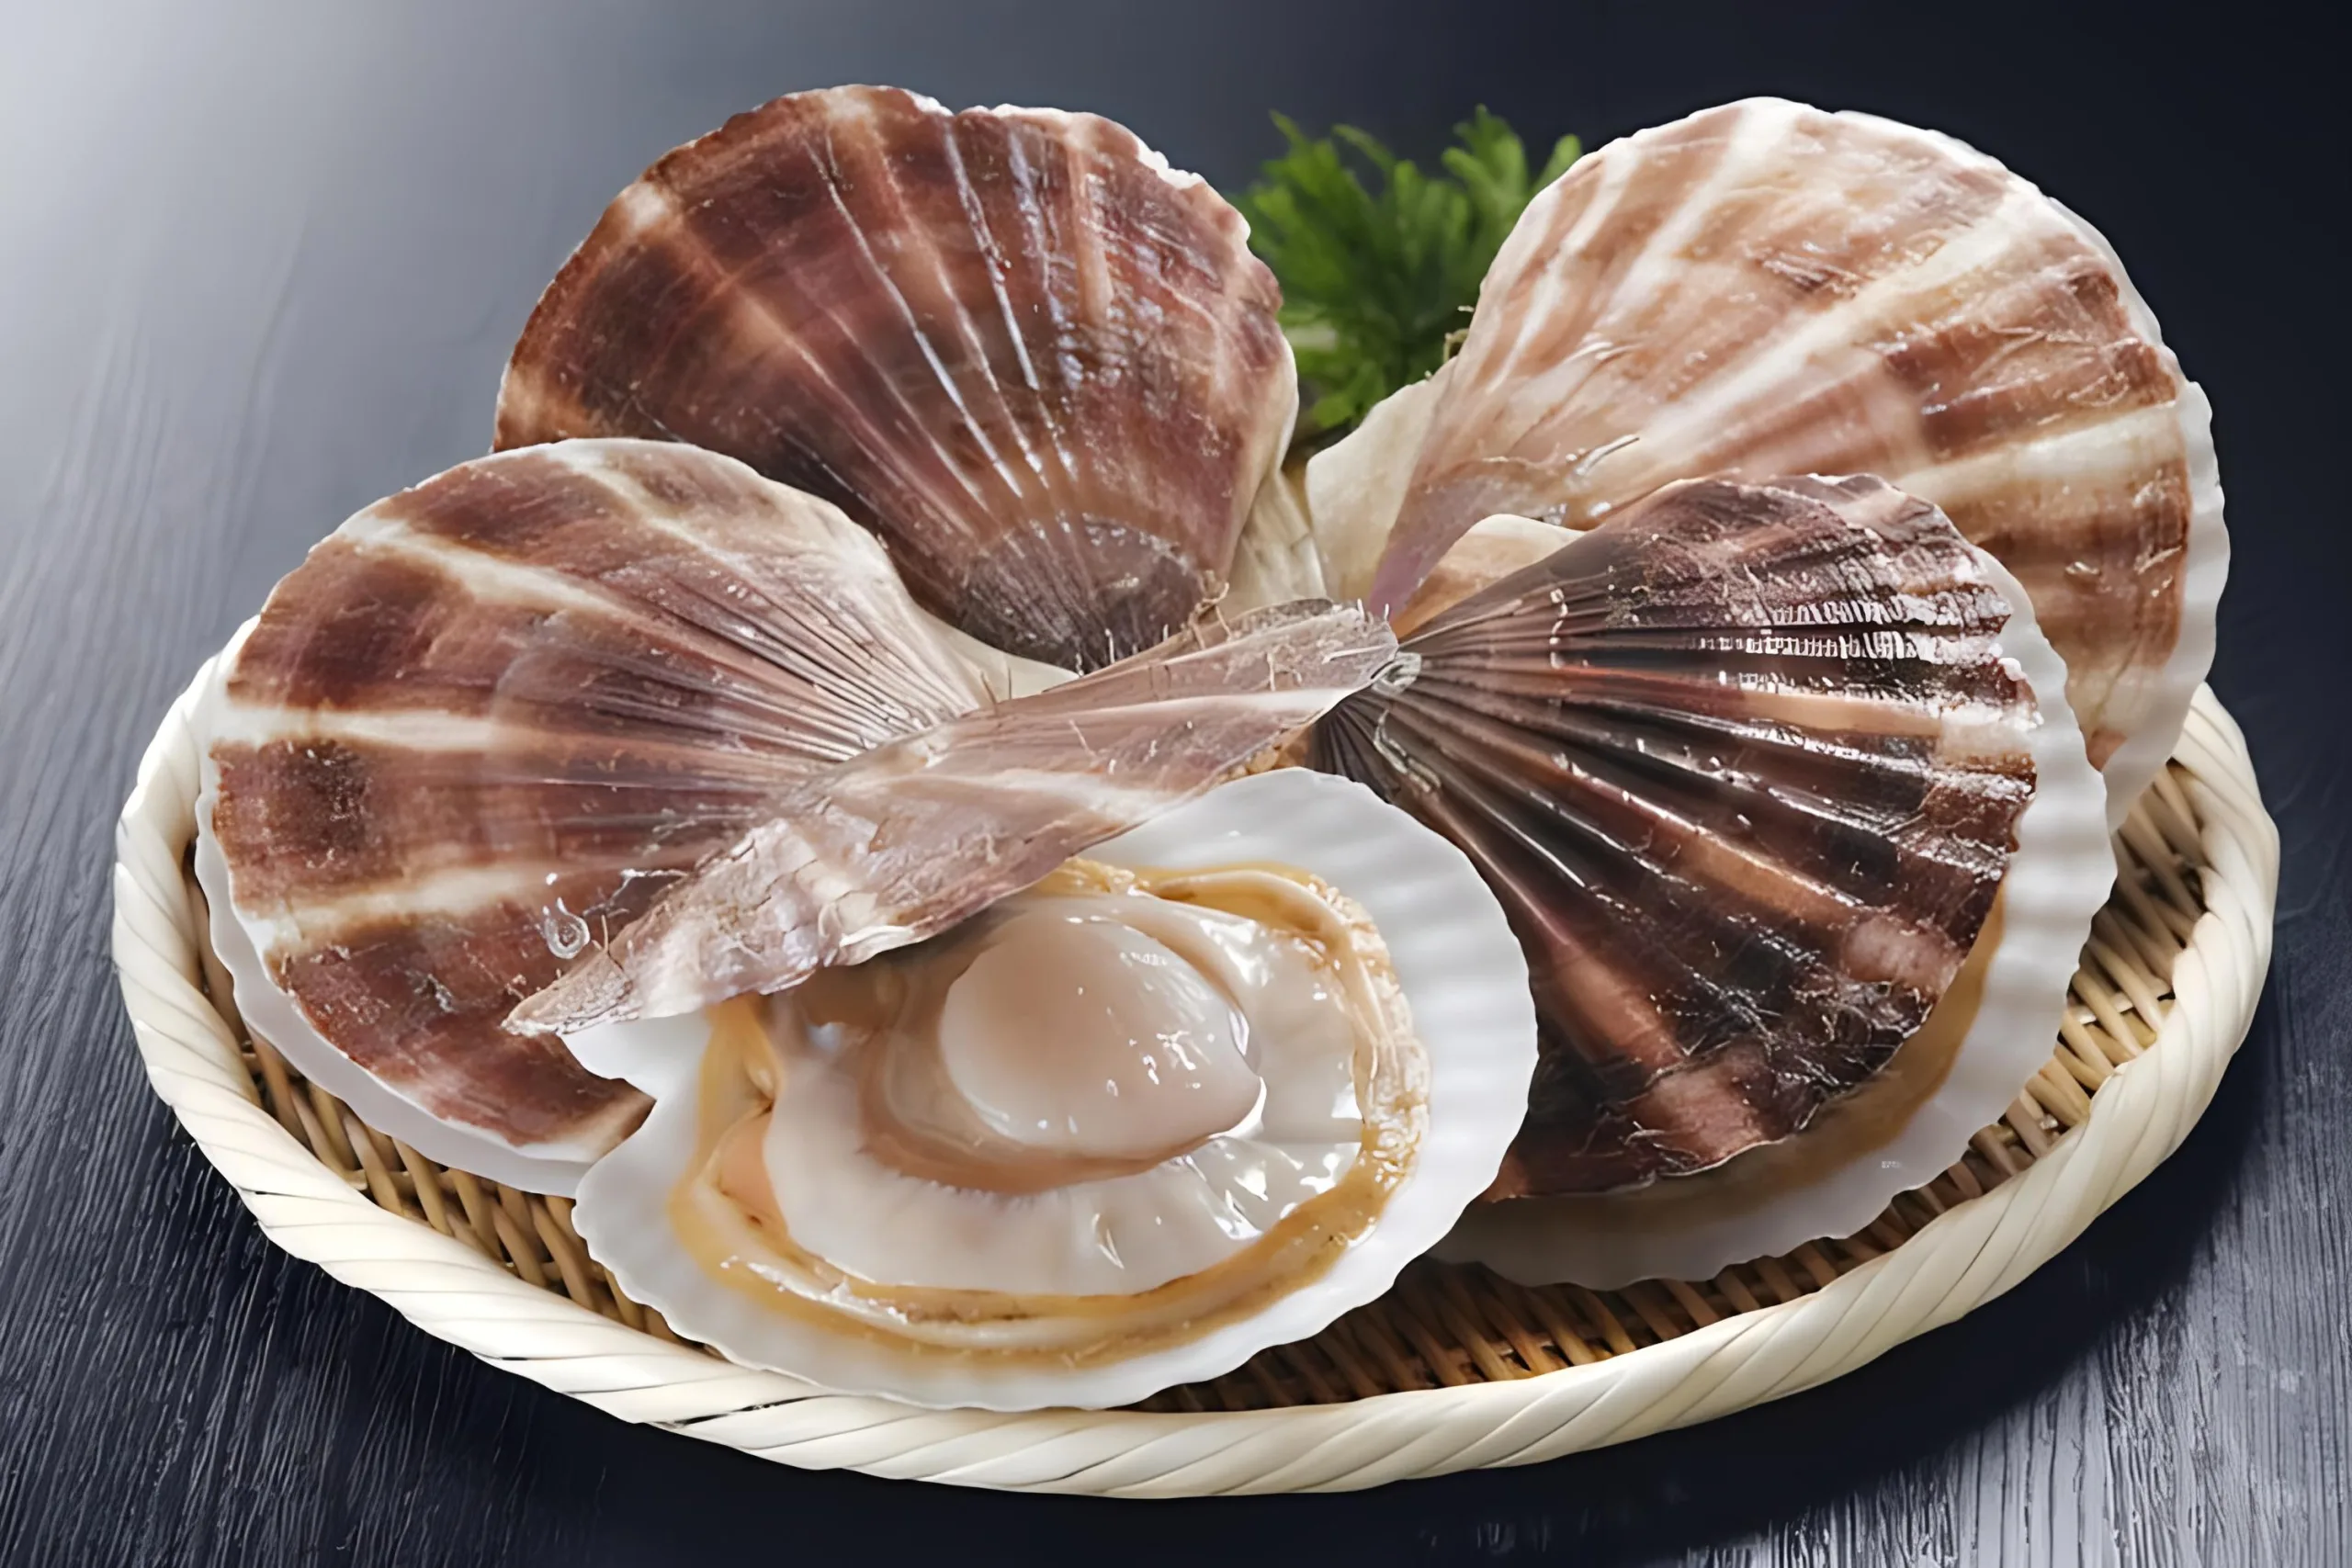 Scallop shells: How the seafood is used other than for eating